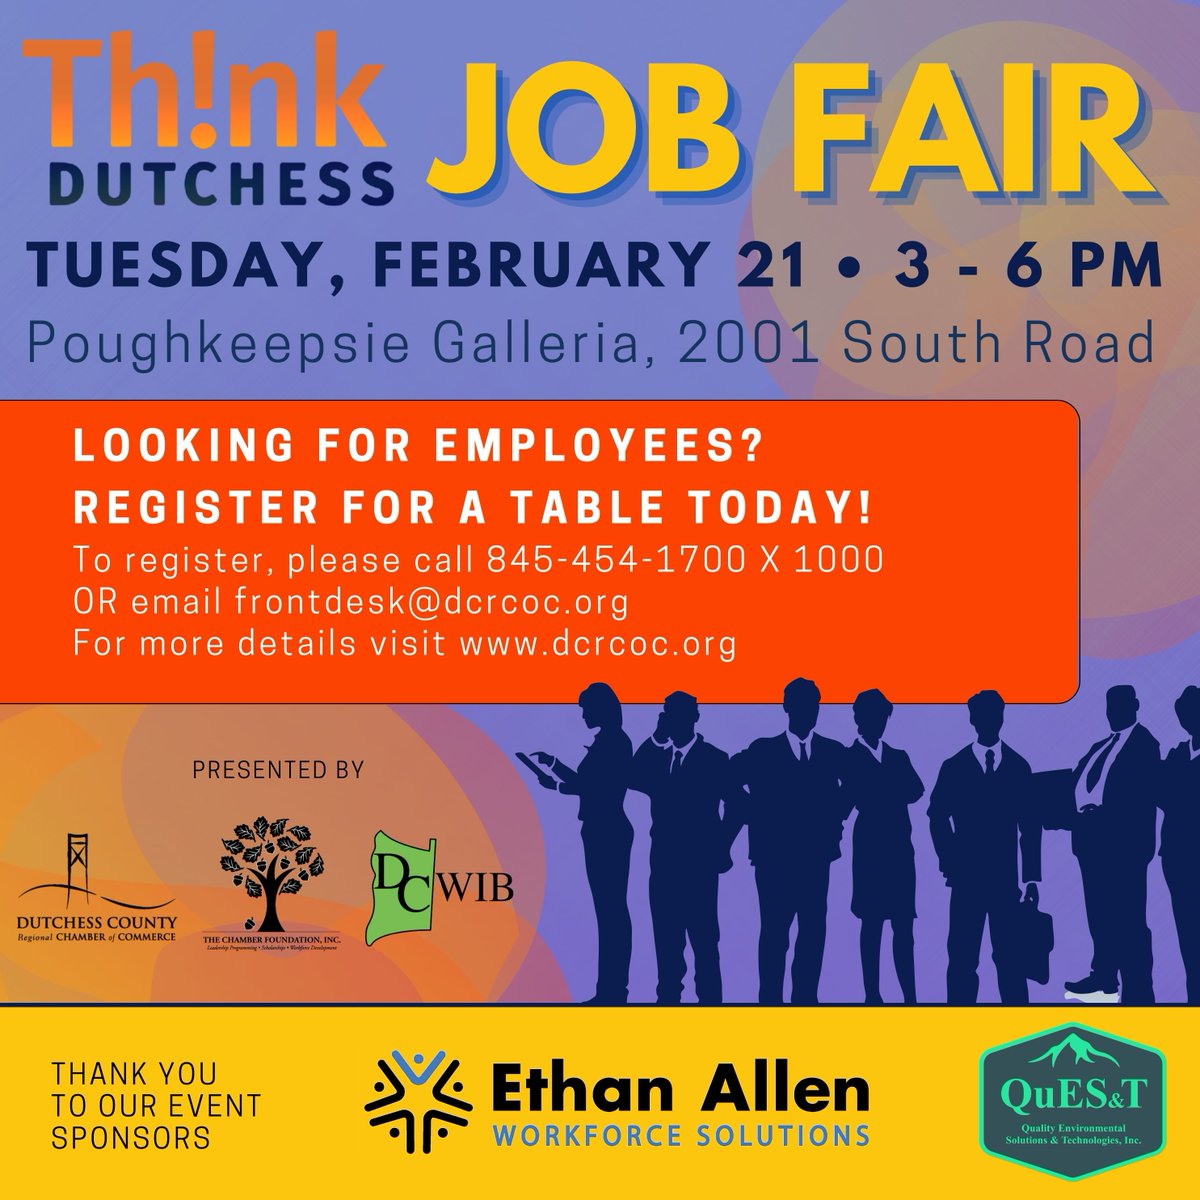 If your business is actively recruiting job seekers, register now for the Th!nkDutchess Job Fair on 2/21 at the Poughkeepsie Galleria. See full details at DCRCOC.org/jobfair. #jobfair #dutchesscounty #hiring